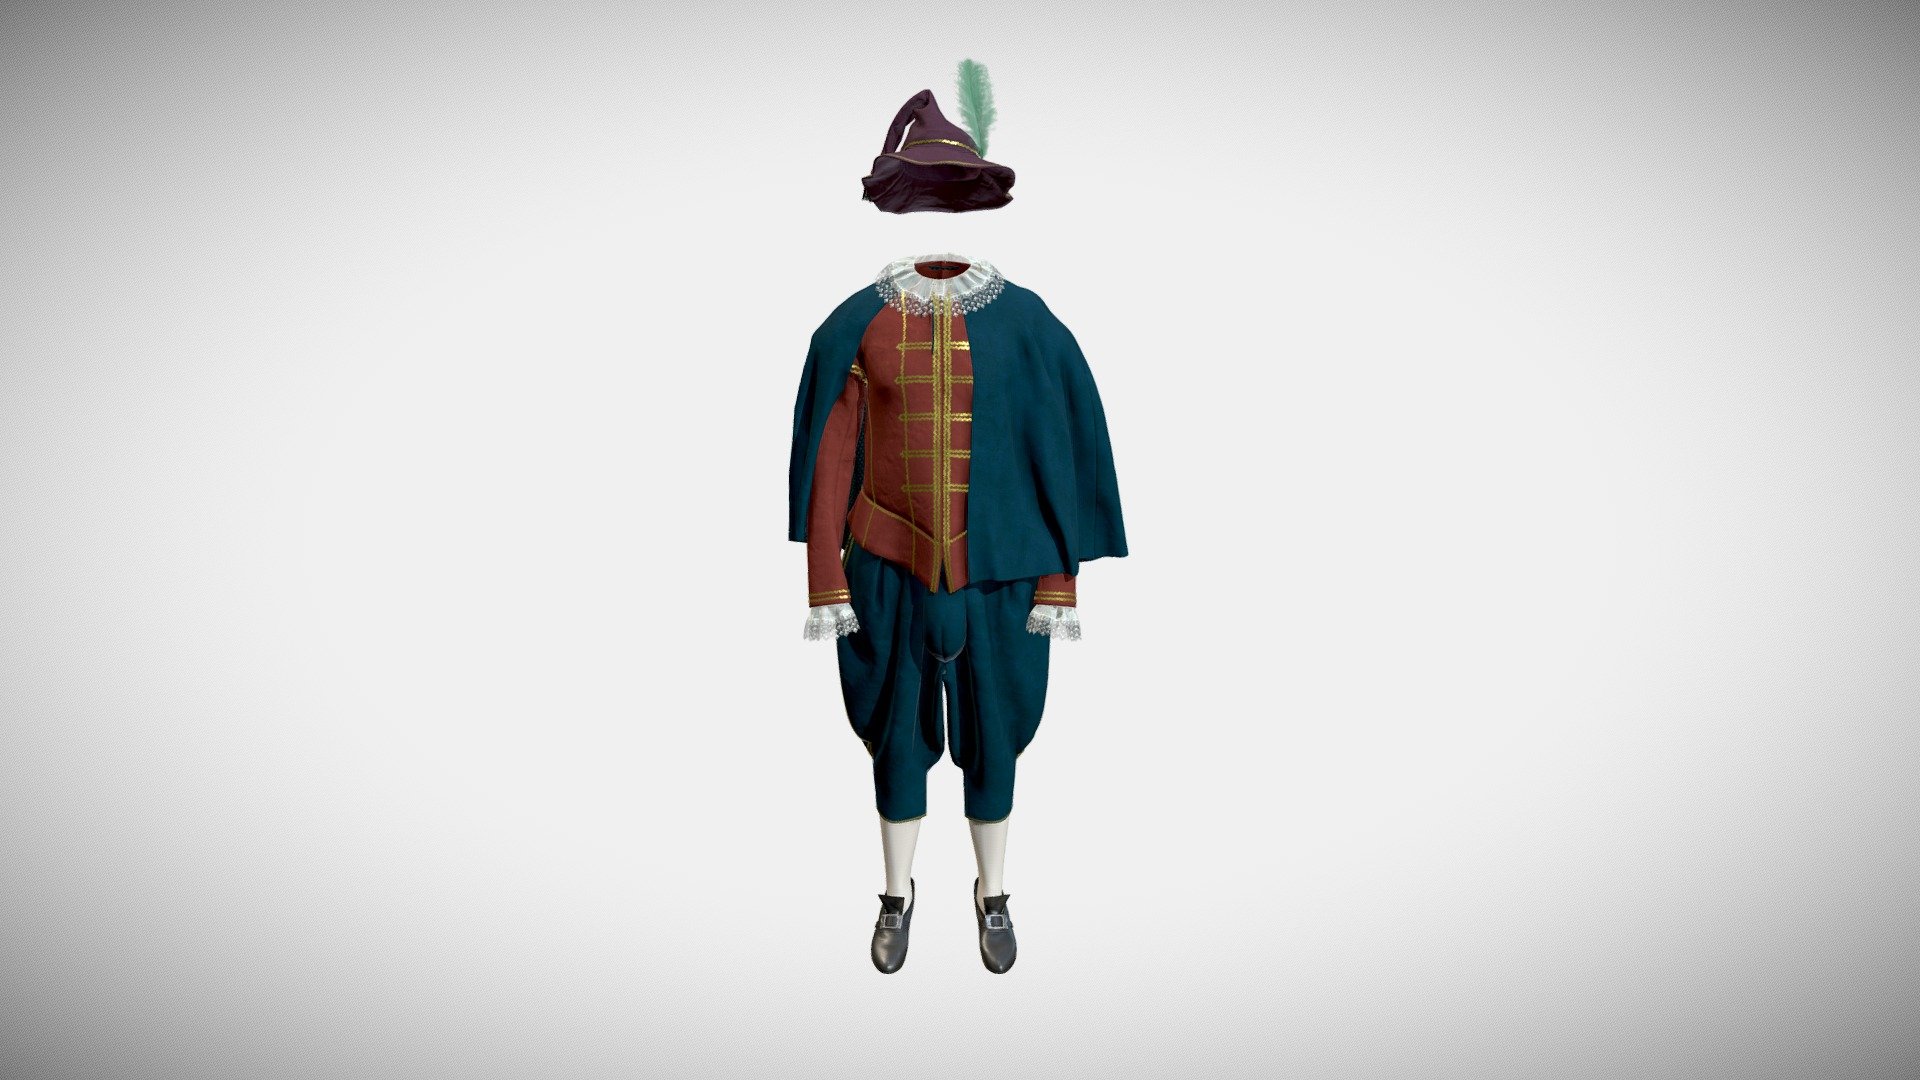 The 3D model presents a digital look of a historical costume from a Russian lubok print “Farnos i Pigasia” dating to the 18th century. The costume was made for a theatrical performance «Indecent is decent» (Ivanovo State Museum of Local History named after D.G. Burylin, October 30, 2019 – March 1, 2020, http://xn&ndash;80ablhhepdp1a2ae9h.xn&ndash;p1ai/). The 3D reconstruction was made by using historical block patterns, 2D scans of textile materials and 3d scans of contemporary actors. Anthroscan, Clo3D, SubstancePainter and Unreal Engine 4 software programs were applied. A video presentation of the 3D model is available at https://youtube.com/playlist?list=PLCTQCzEpoeLuo_6RFLyIWZcO8f-c0LcaM&amp;feature=shared

The authors of the 3D model are Mariia Moskvina and Aleksei Moskvin (Saint Petersburg State University of Industrial Technologies and Design)

The authors thanks Victor Kuzmichev for his valuable contribution to the reconstruction 3d model